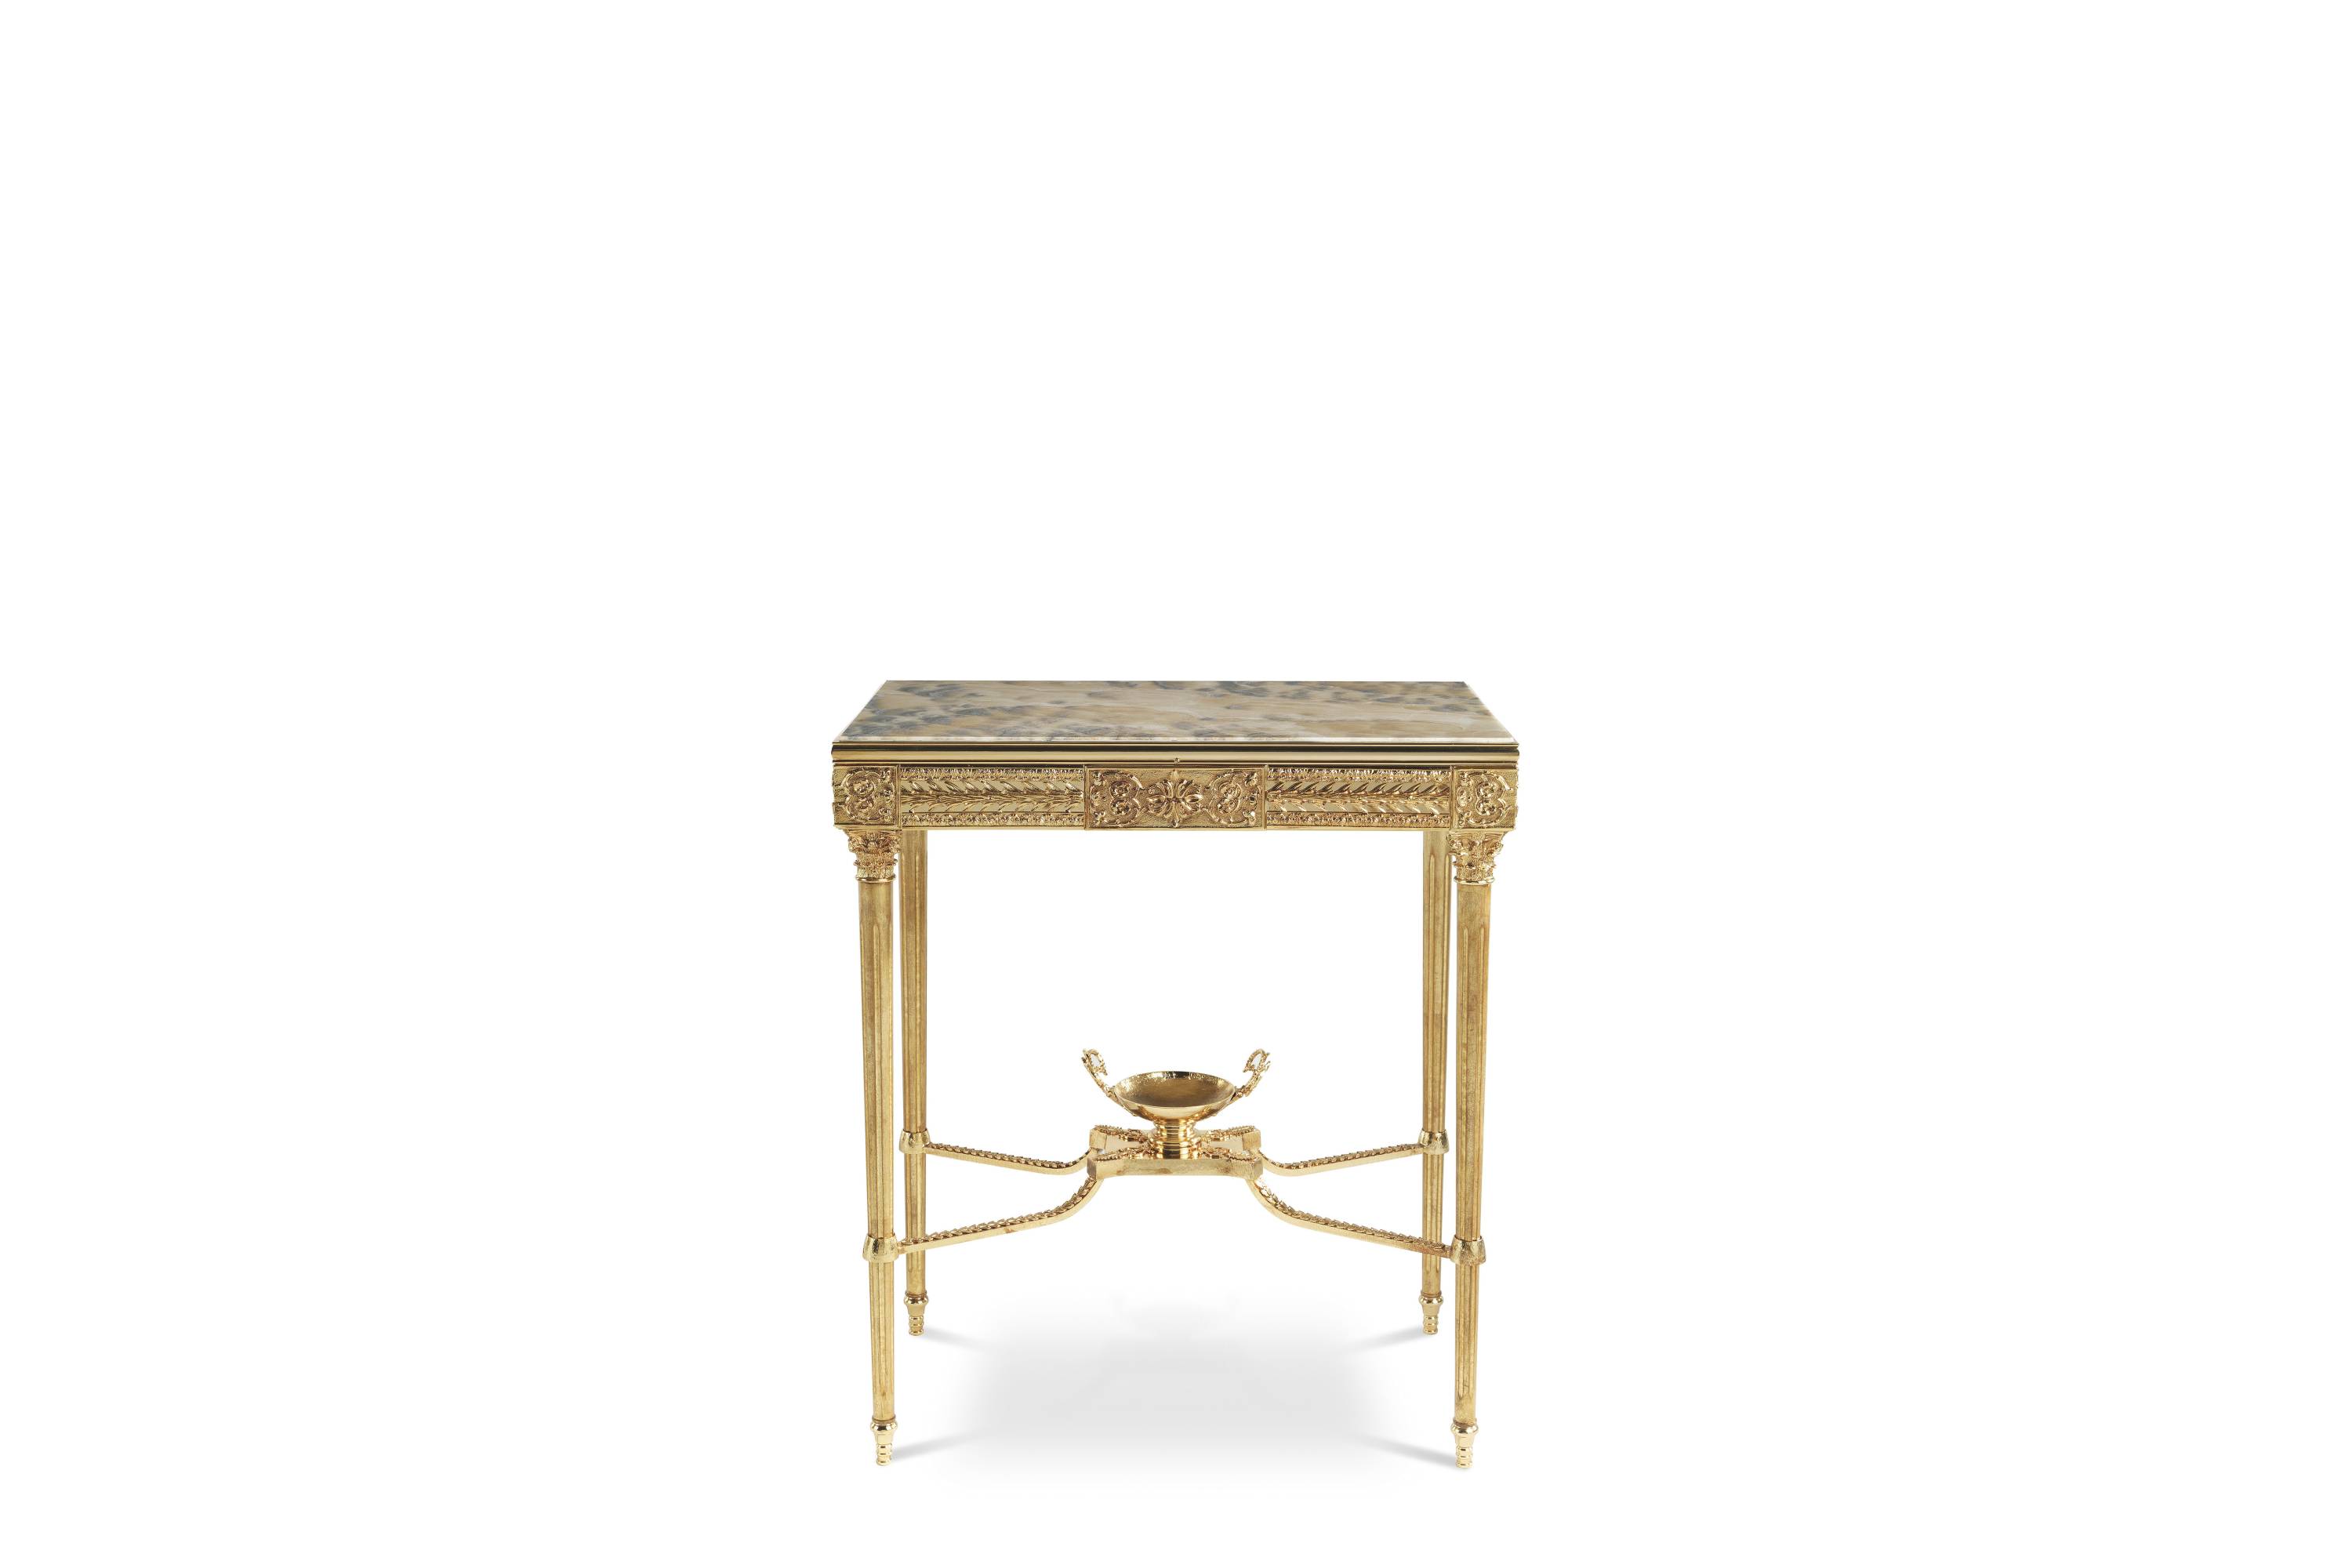 SHOGUN low table - A luxury experience with the Oro Bianco collection and its classic luxurious furniture